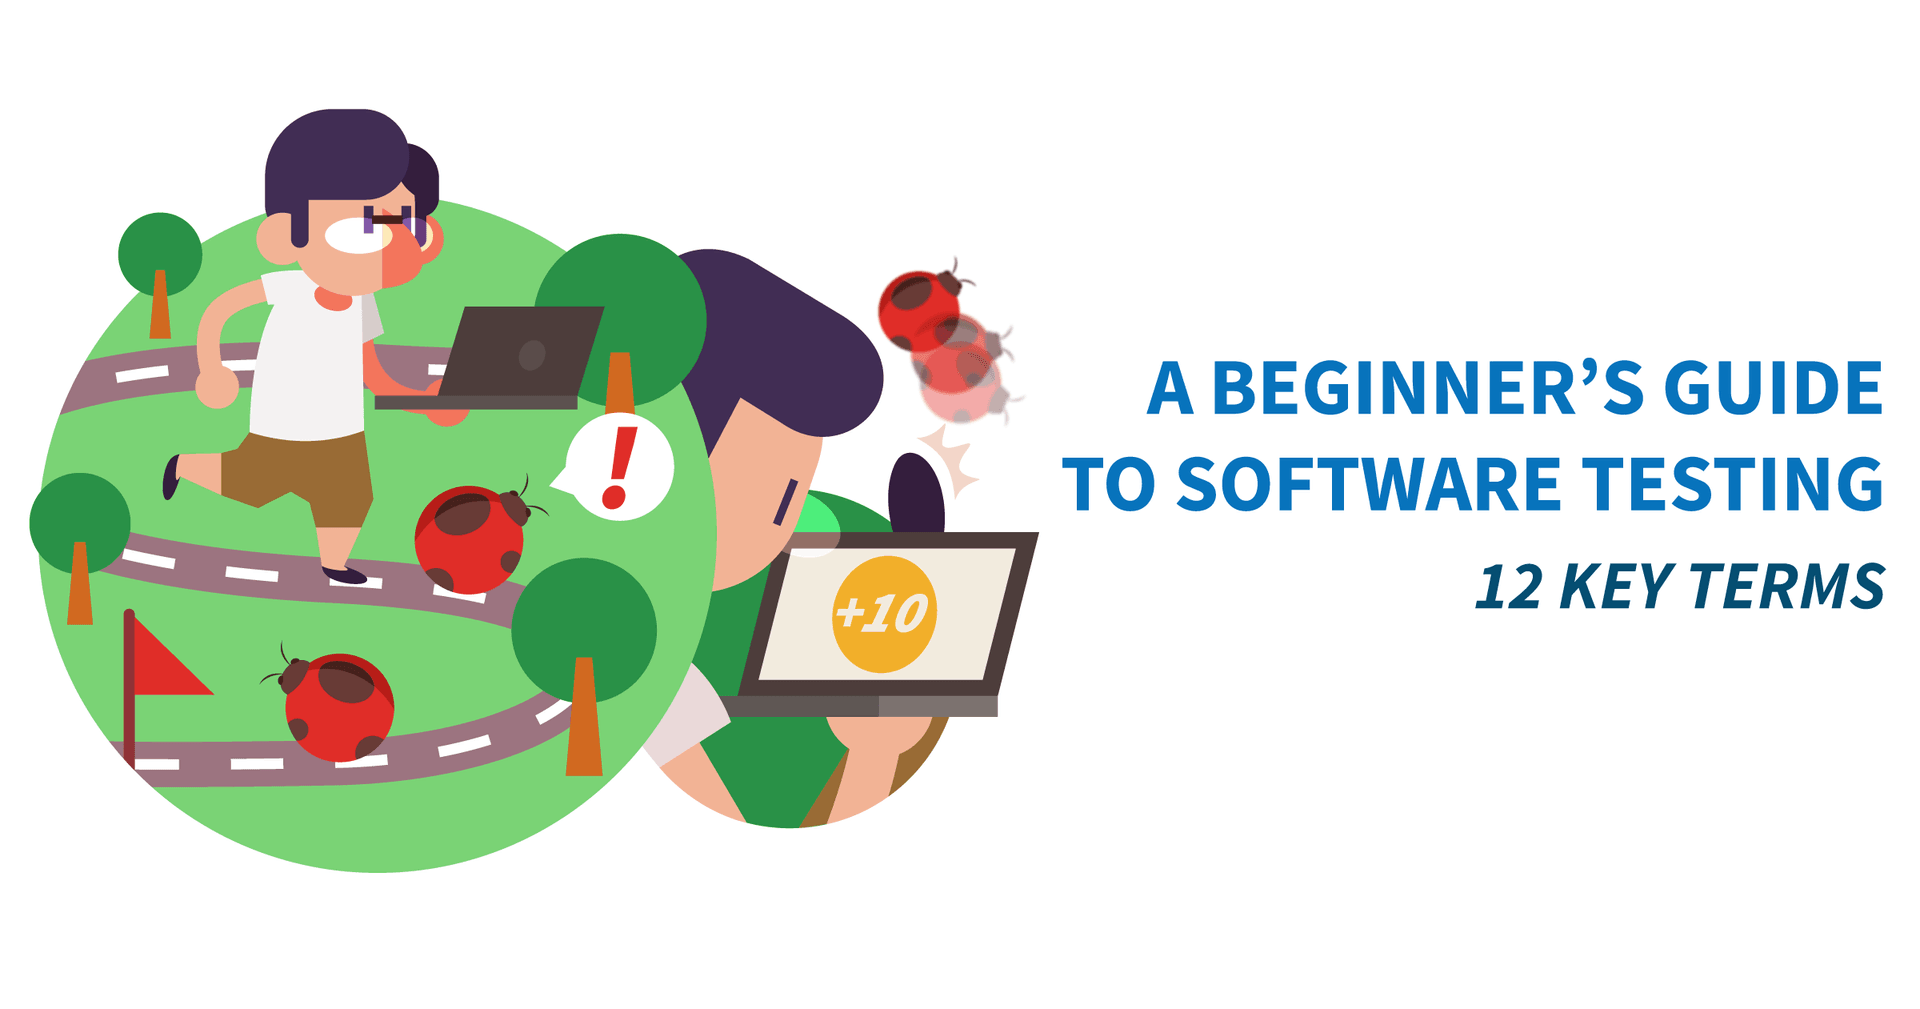 A beginner's guide to software testing (12 key terms)